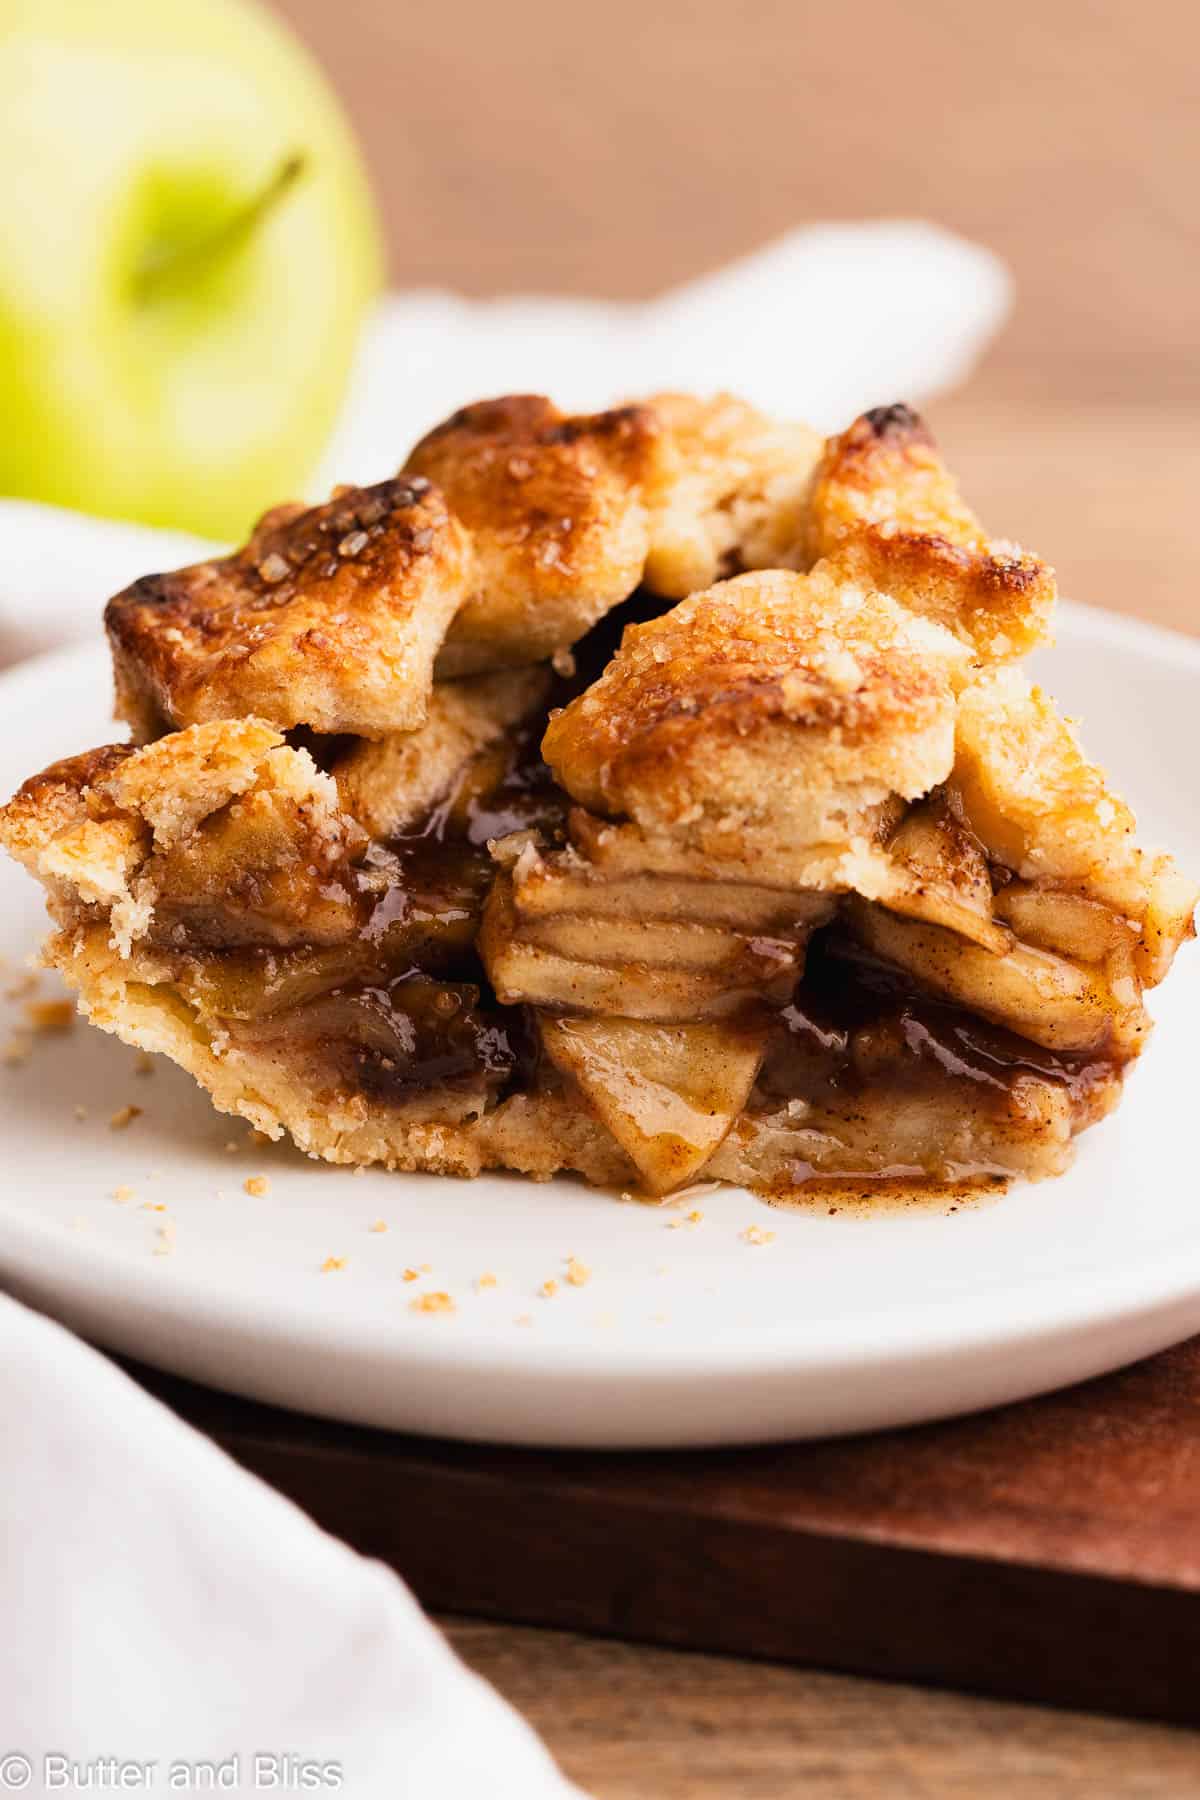 A yummy slice of gluten free apple pie with gooey filling on a white plate.